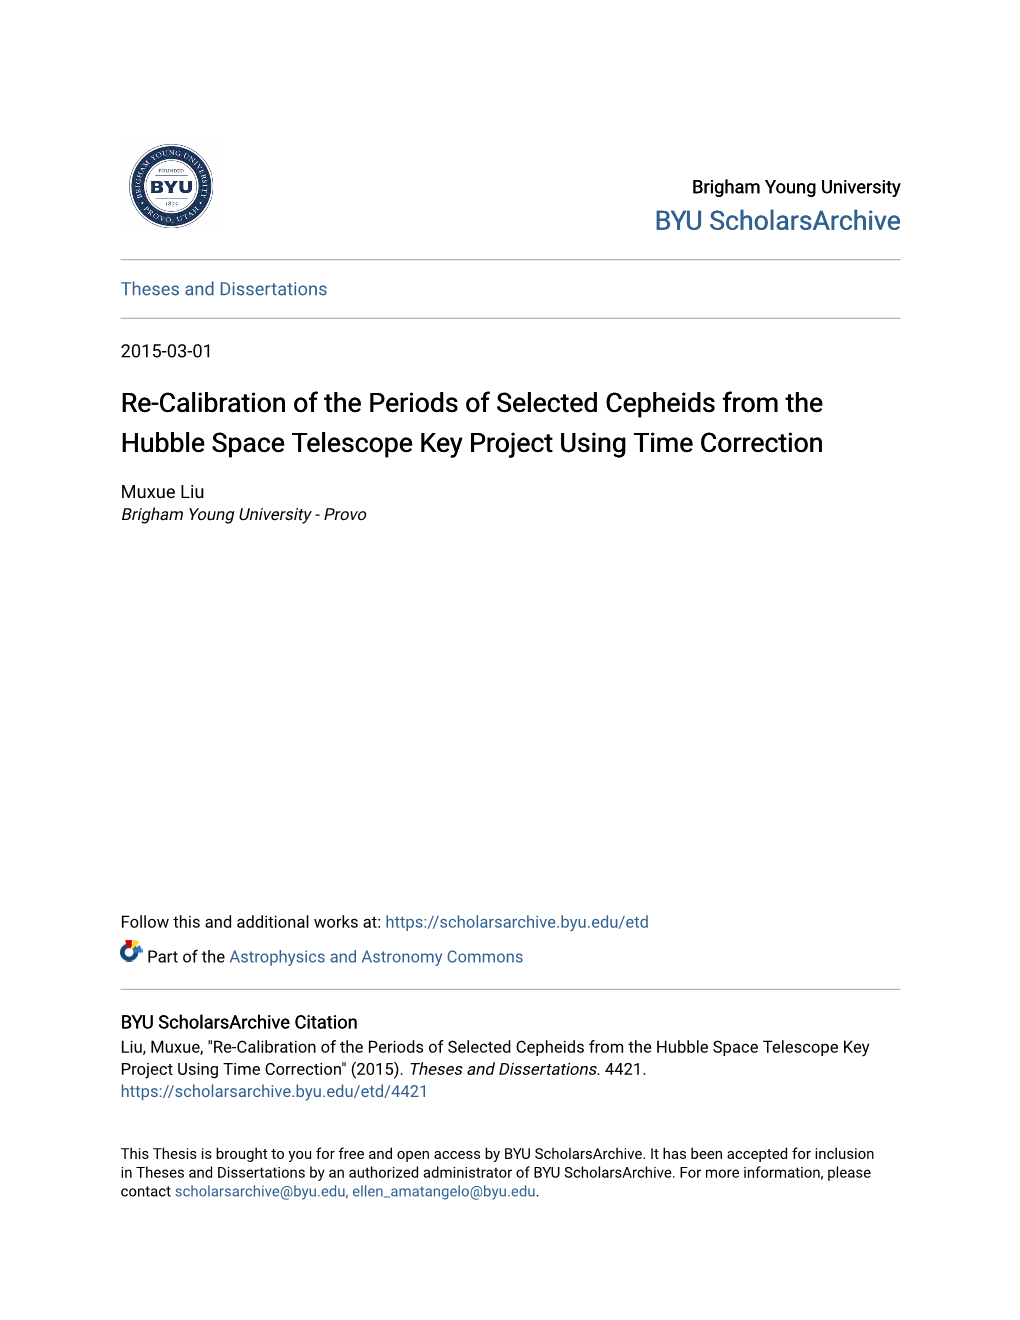 Re-Calibration of the Periods of Selected Cepheids from the Hubble Space Telescope Key Project Using Time Correction